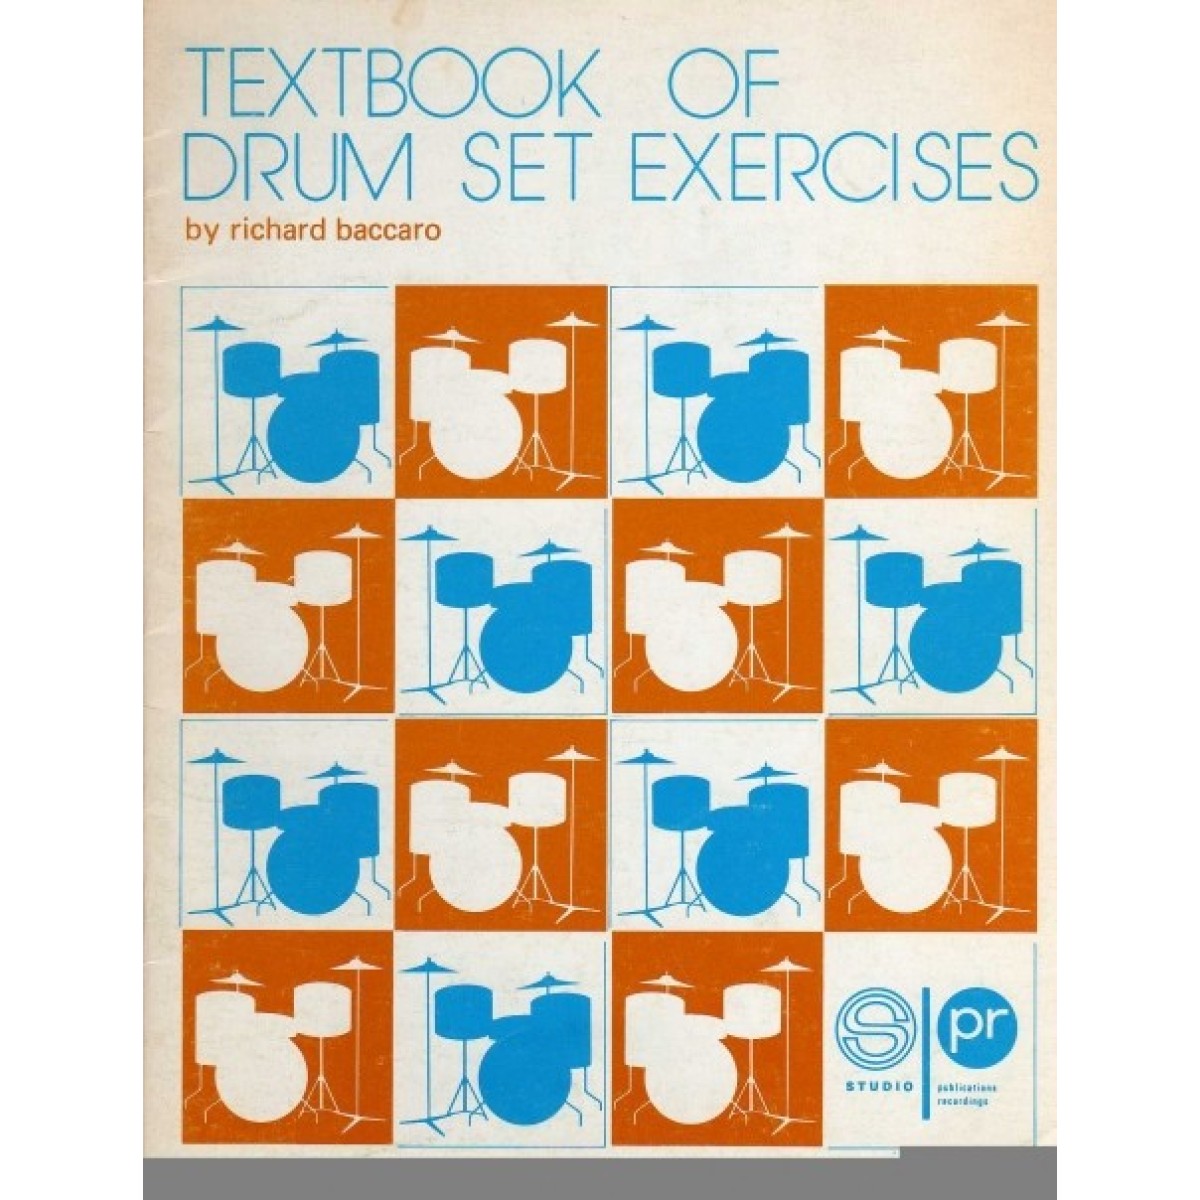 Textbook of Drum Set Exercises (Lasy Copy - Out of Print)